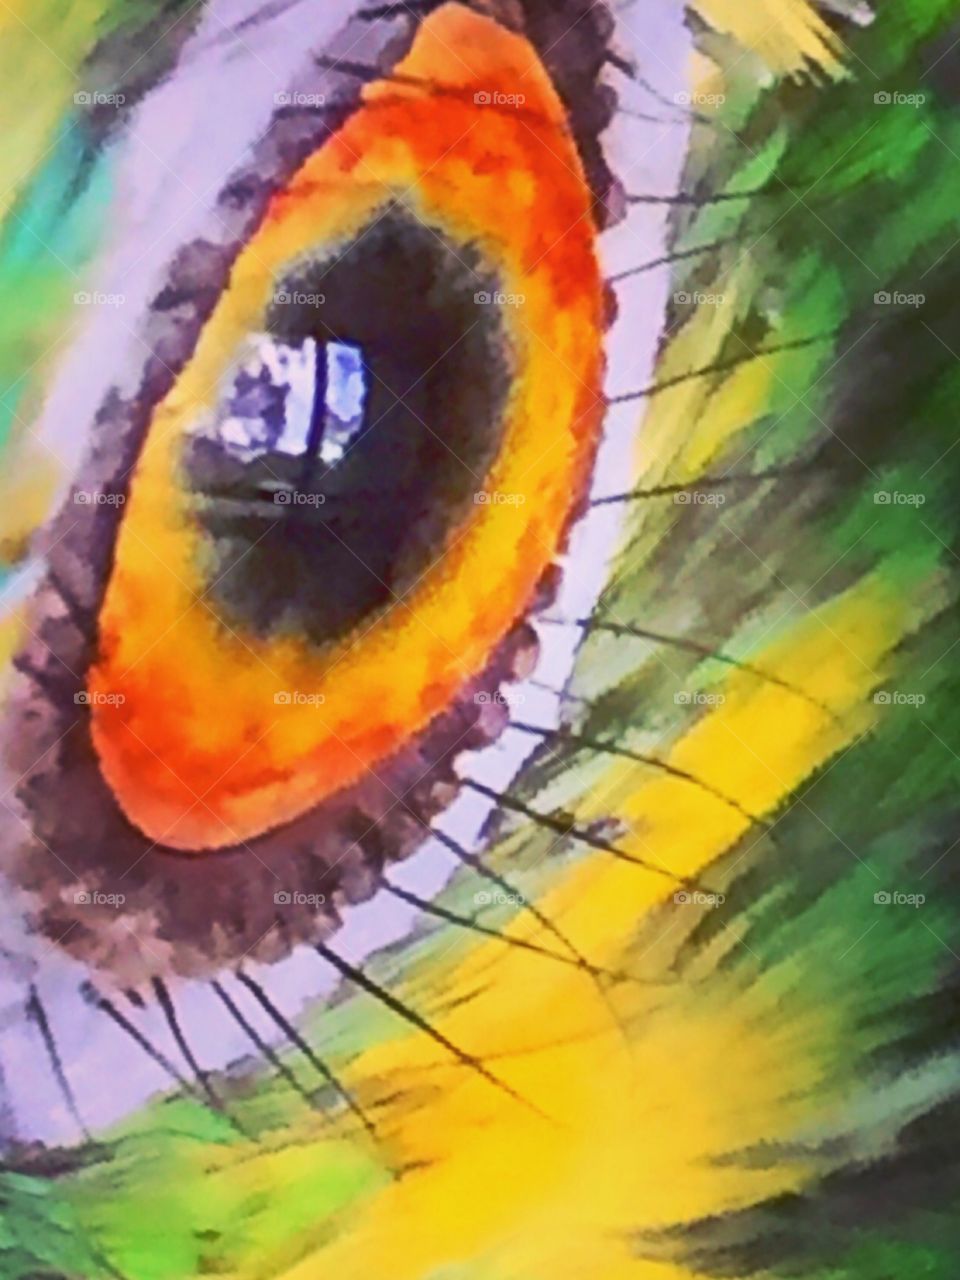 A close look at a parrot's eye